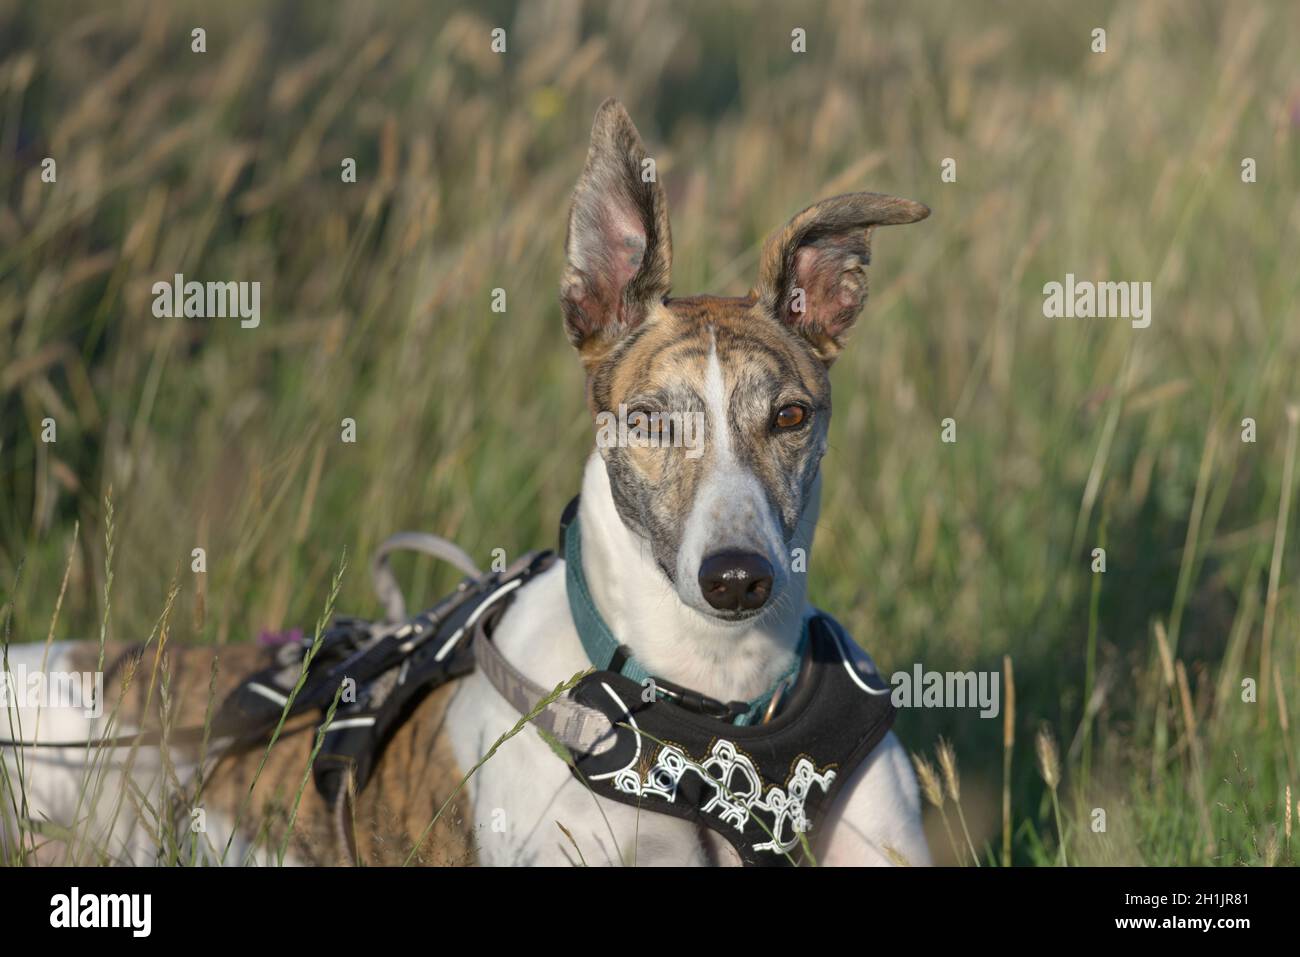 Striking face on medium portrait of pet greyhound dog staring at the camera. Big ears stand up in the warm sunset light. Natural grassy background. Stock Photo